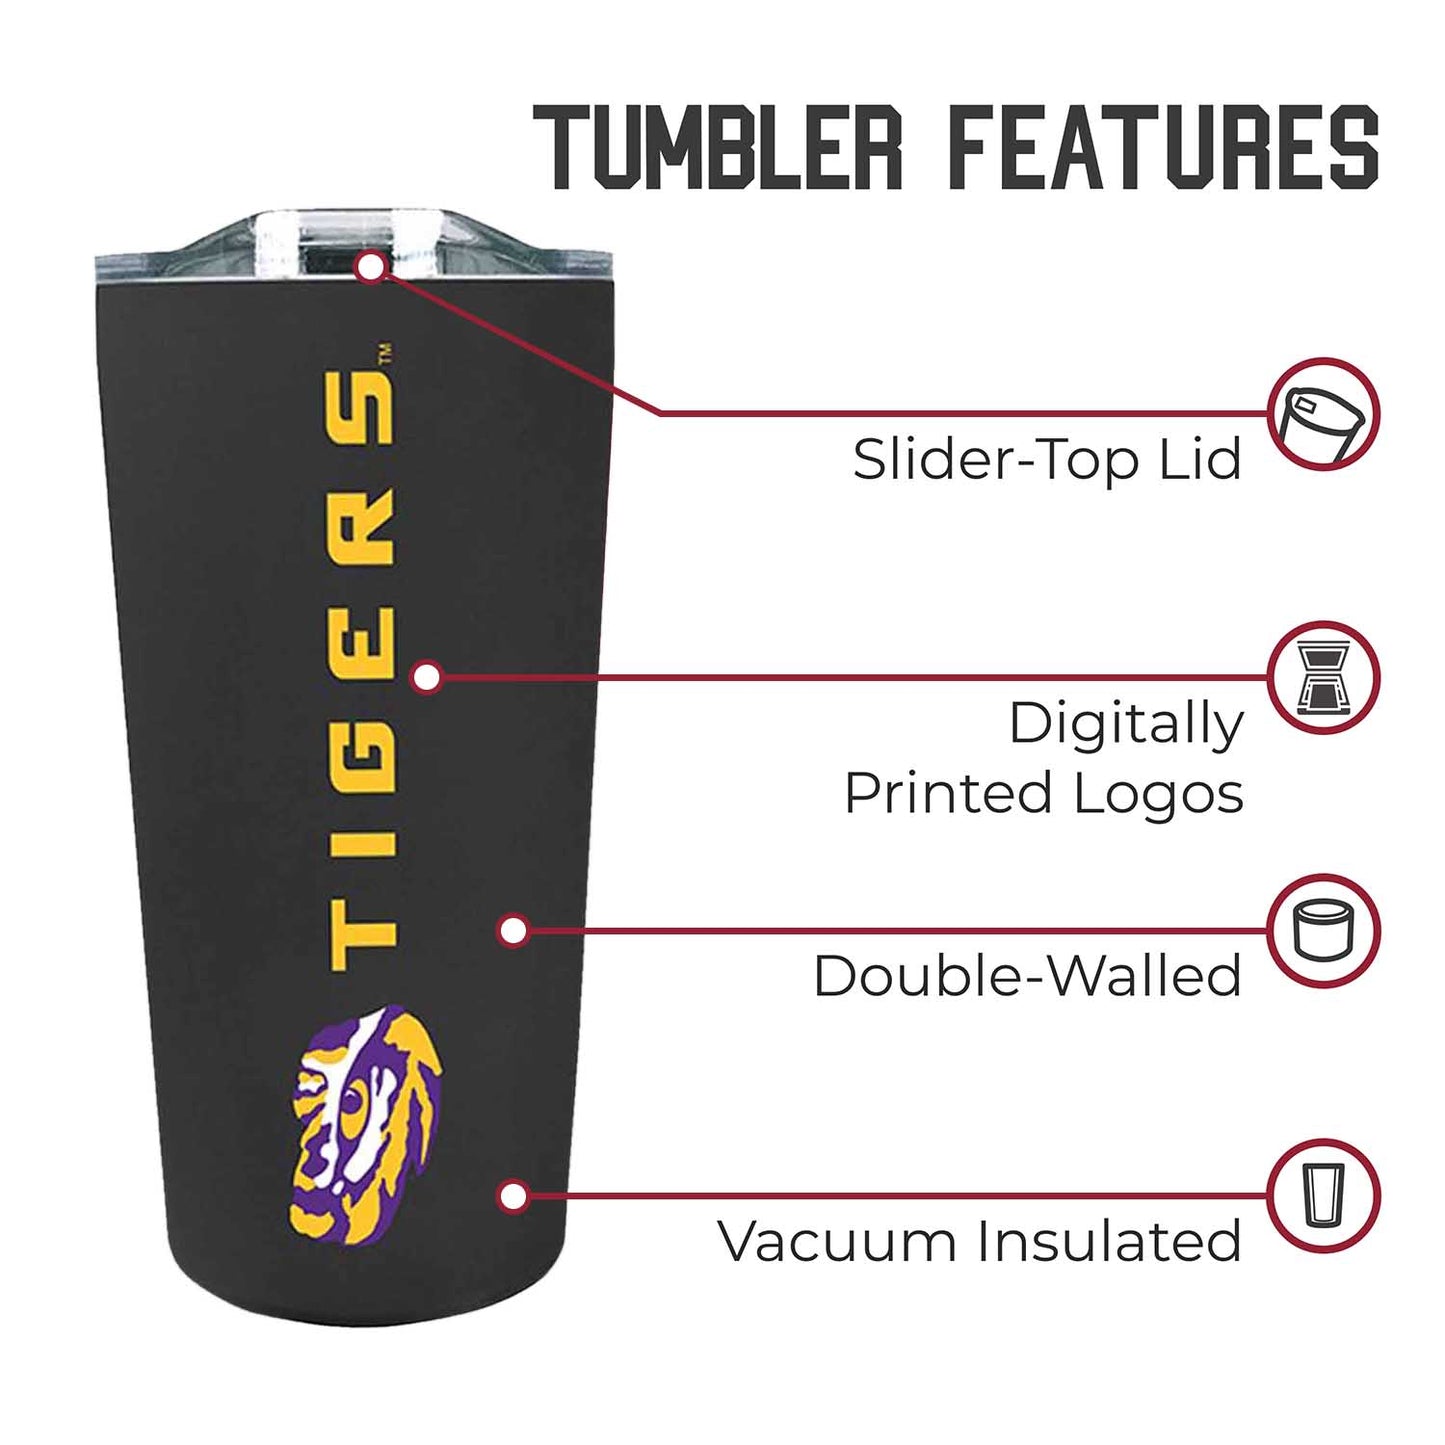 LSU Tigers NCAA Stainless Steel Tumbler perfect for Gameday - Black